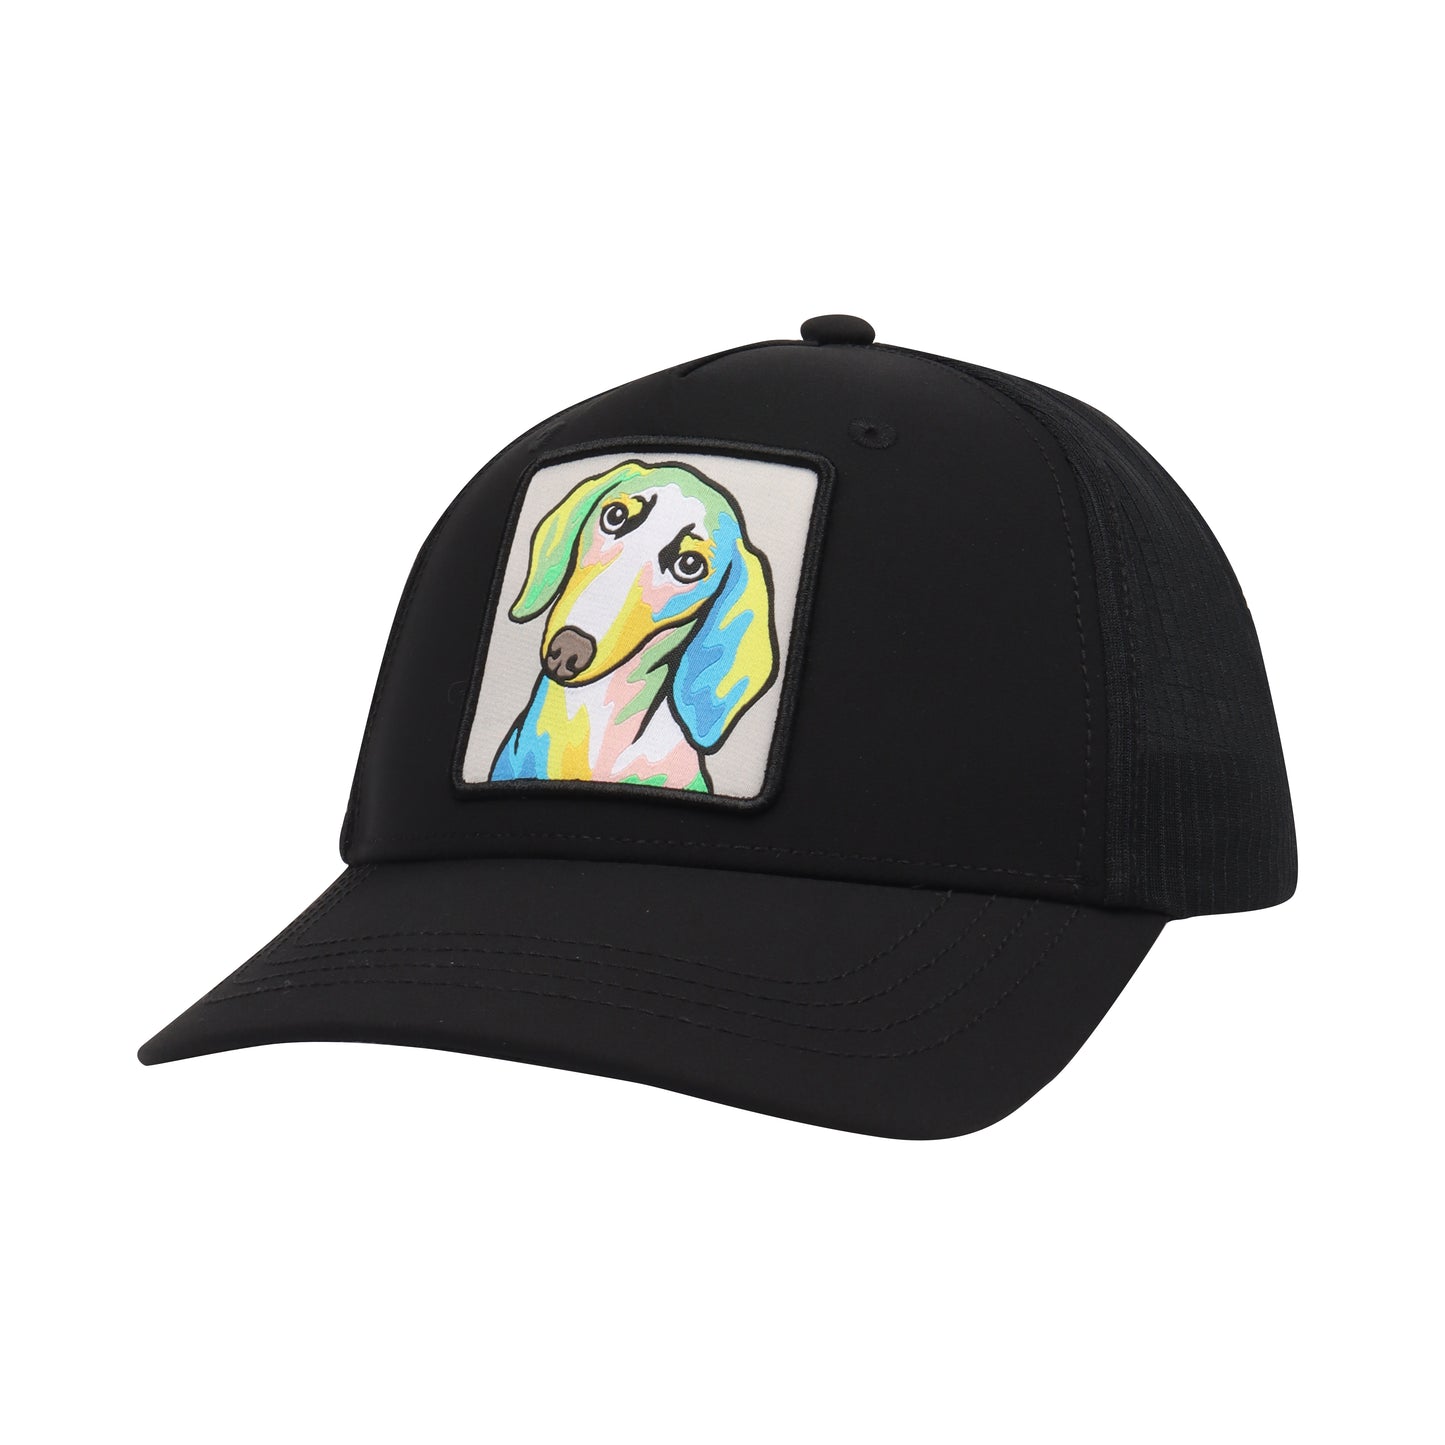 PERFORMANCE TRUCKER HAT FOR DACHSHUND DOXIE LOVERS FOR MEN & WOMEN PATCH FRONT MESH BACK ADJUSTABLE FIT